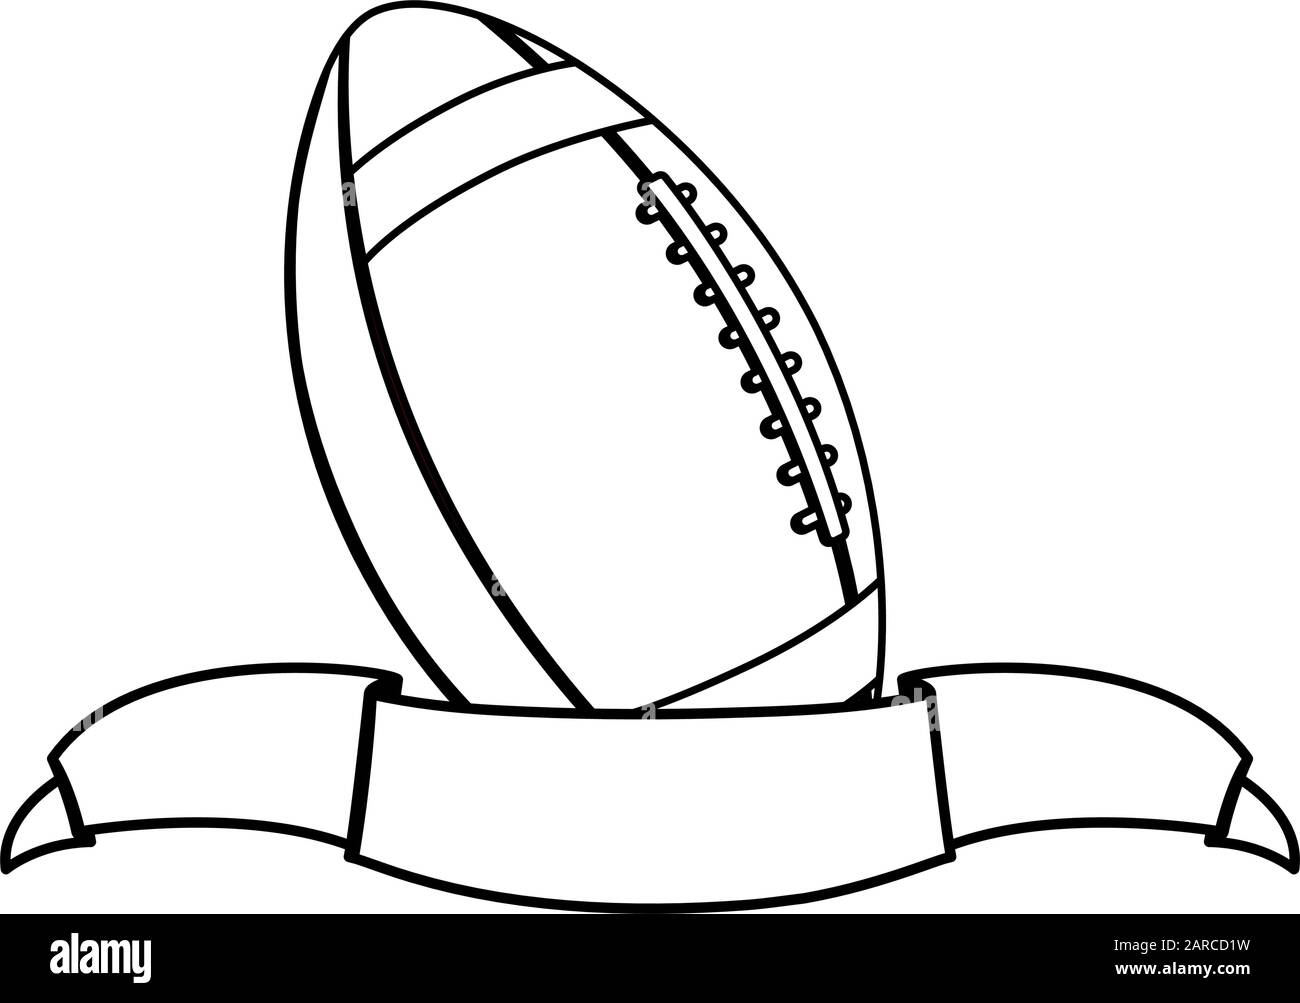 american football ball with ribbon on white background vector illustration design Stock Vector